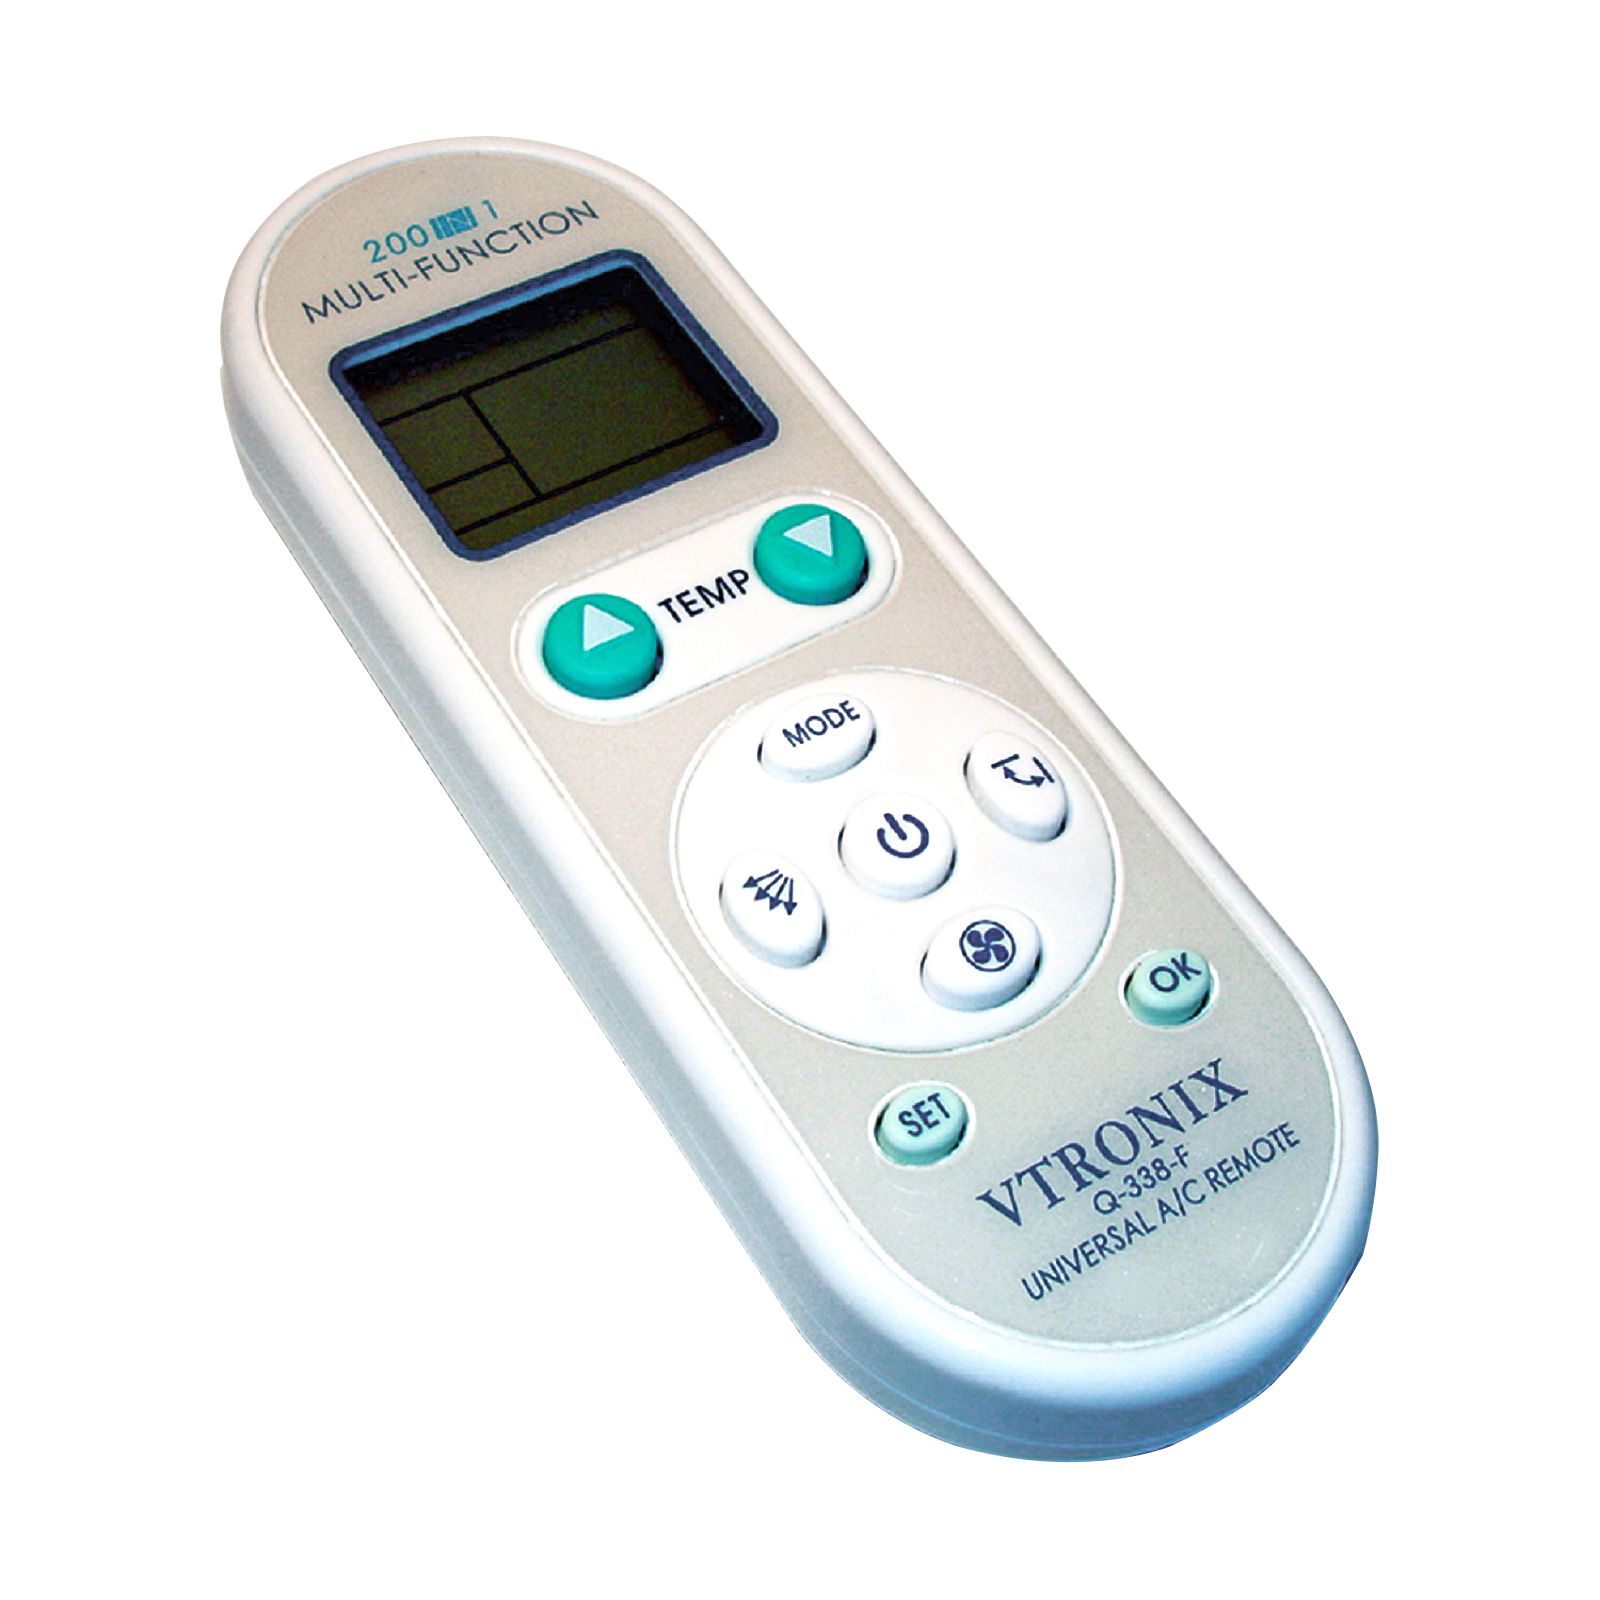 Vtronix Q-338-F -  # Universal Remote Control for Air Conditioners and Mini-Split Systems